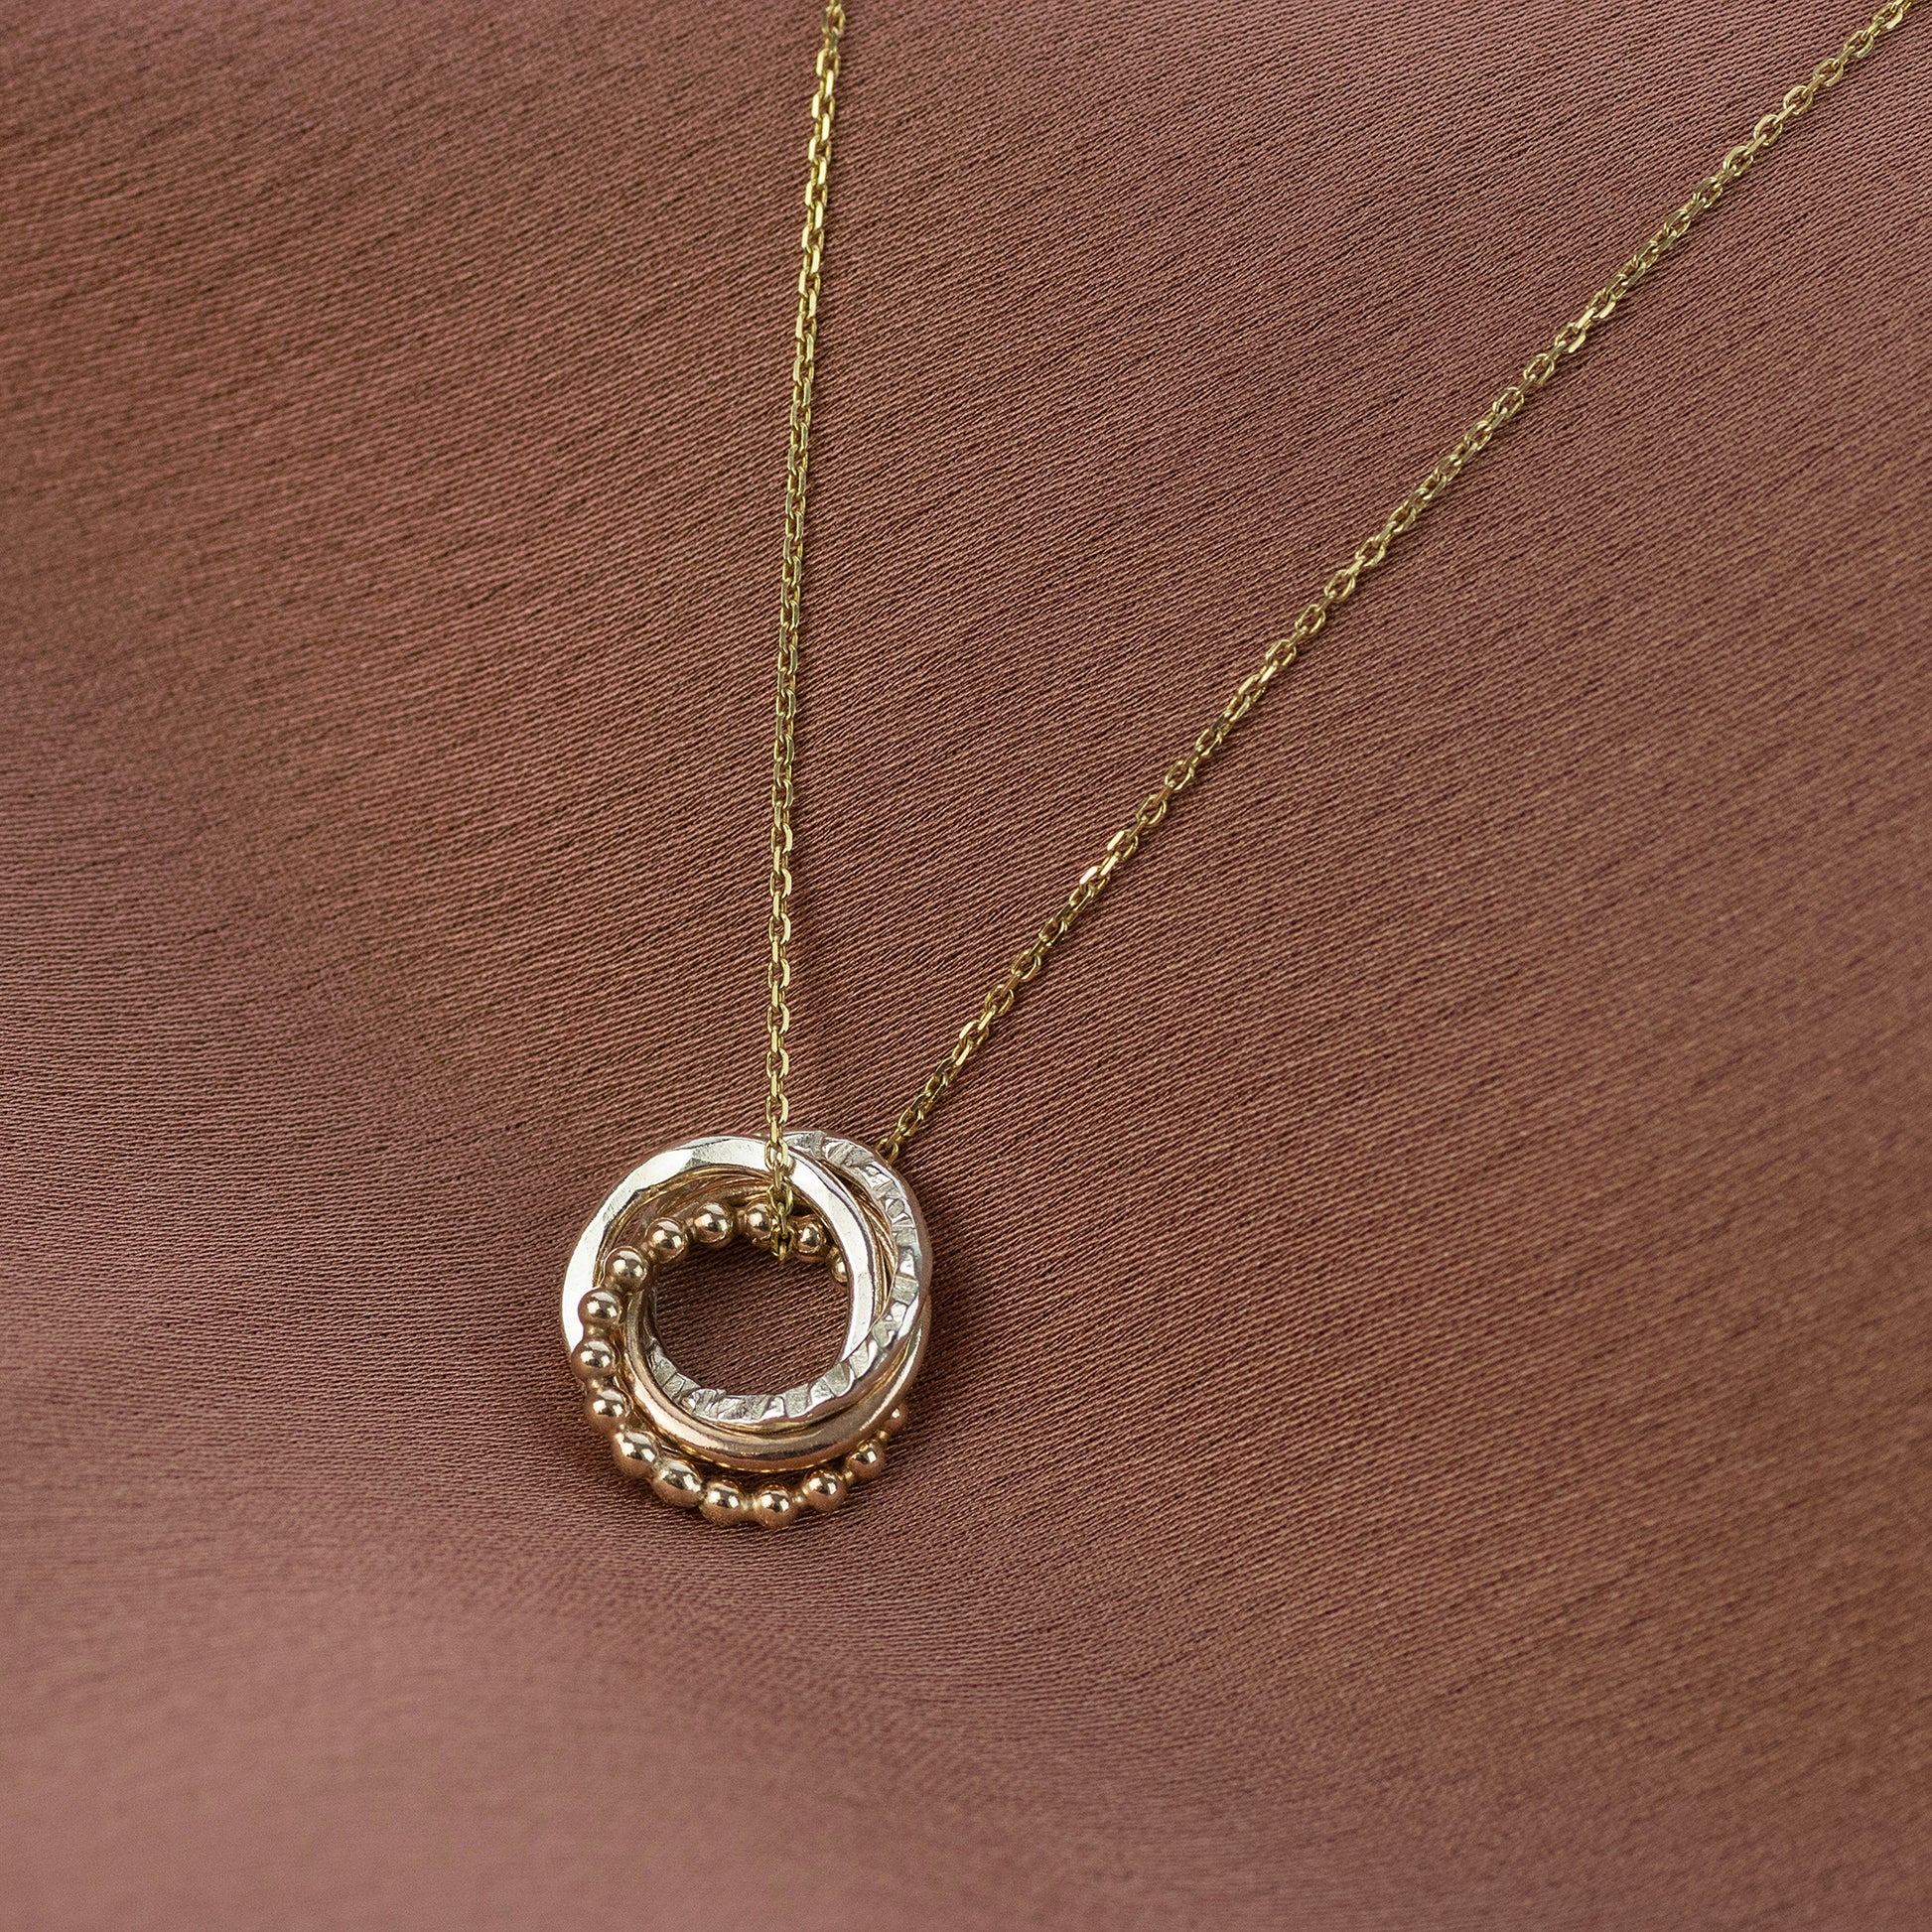 4 Sisters Necklace - 9kt Gold & Silver Love Knot